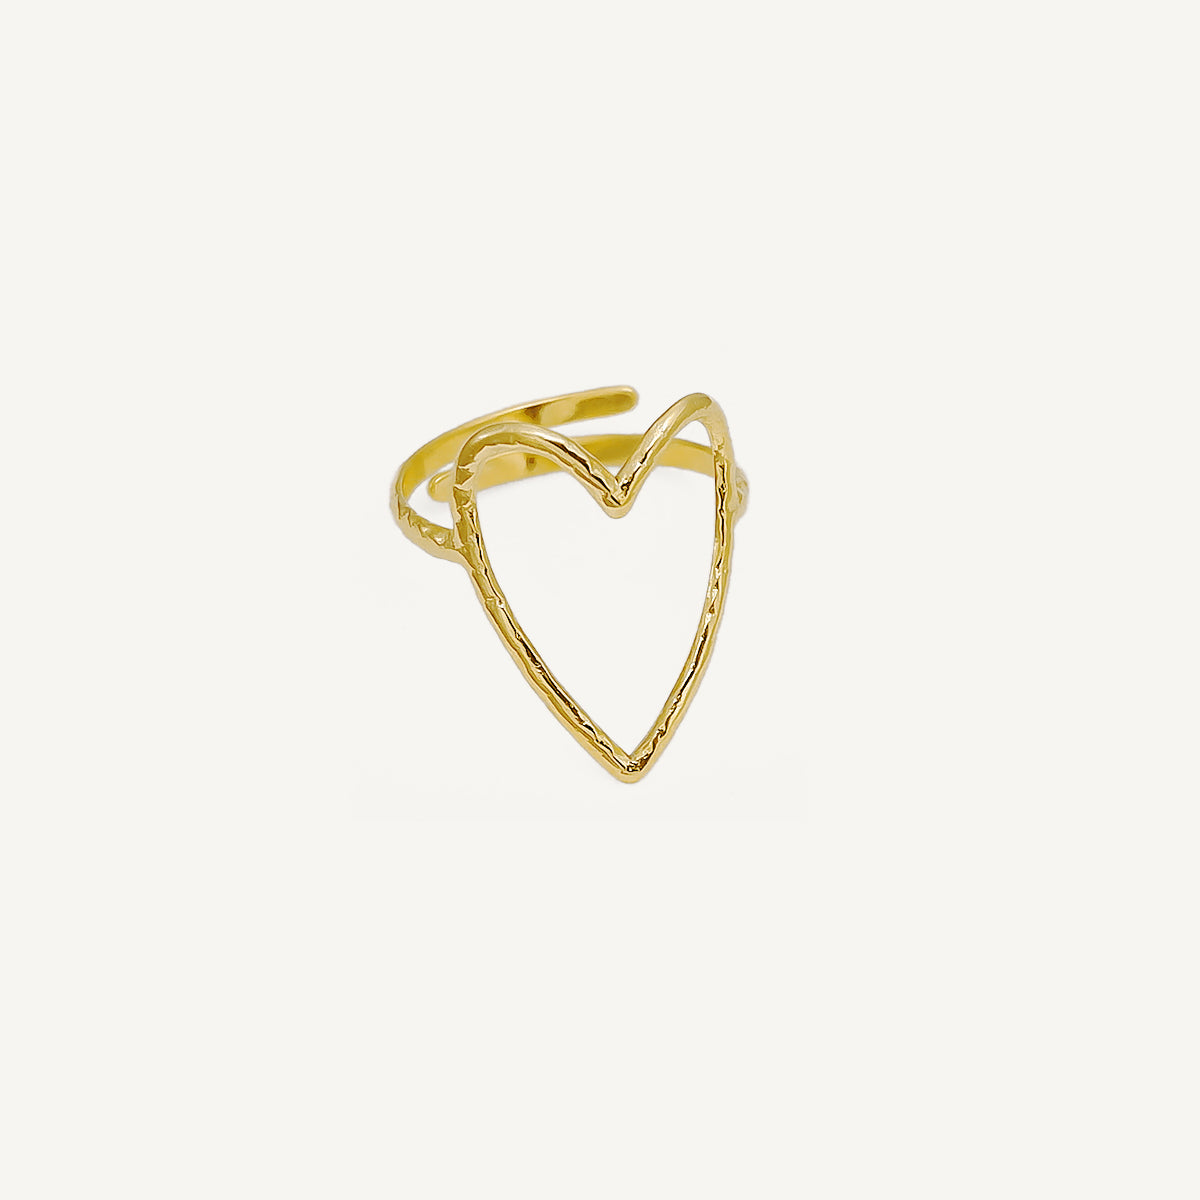 The Any-size Textured Tat Heart Ring